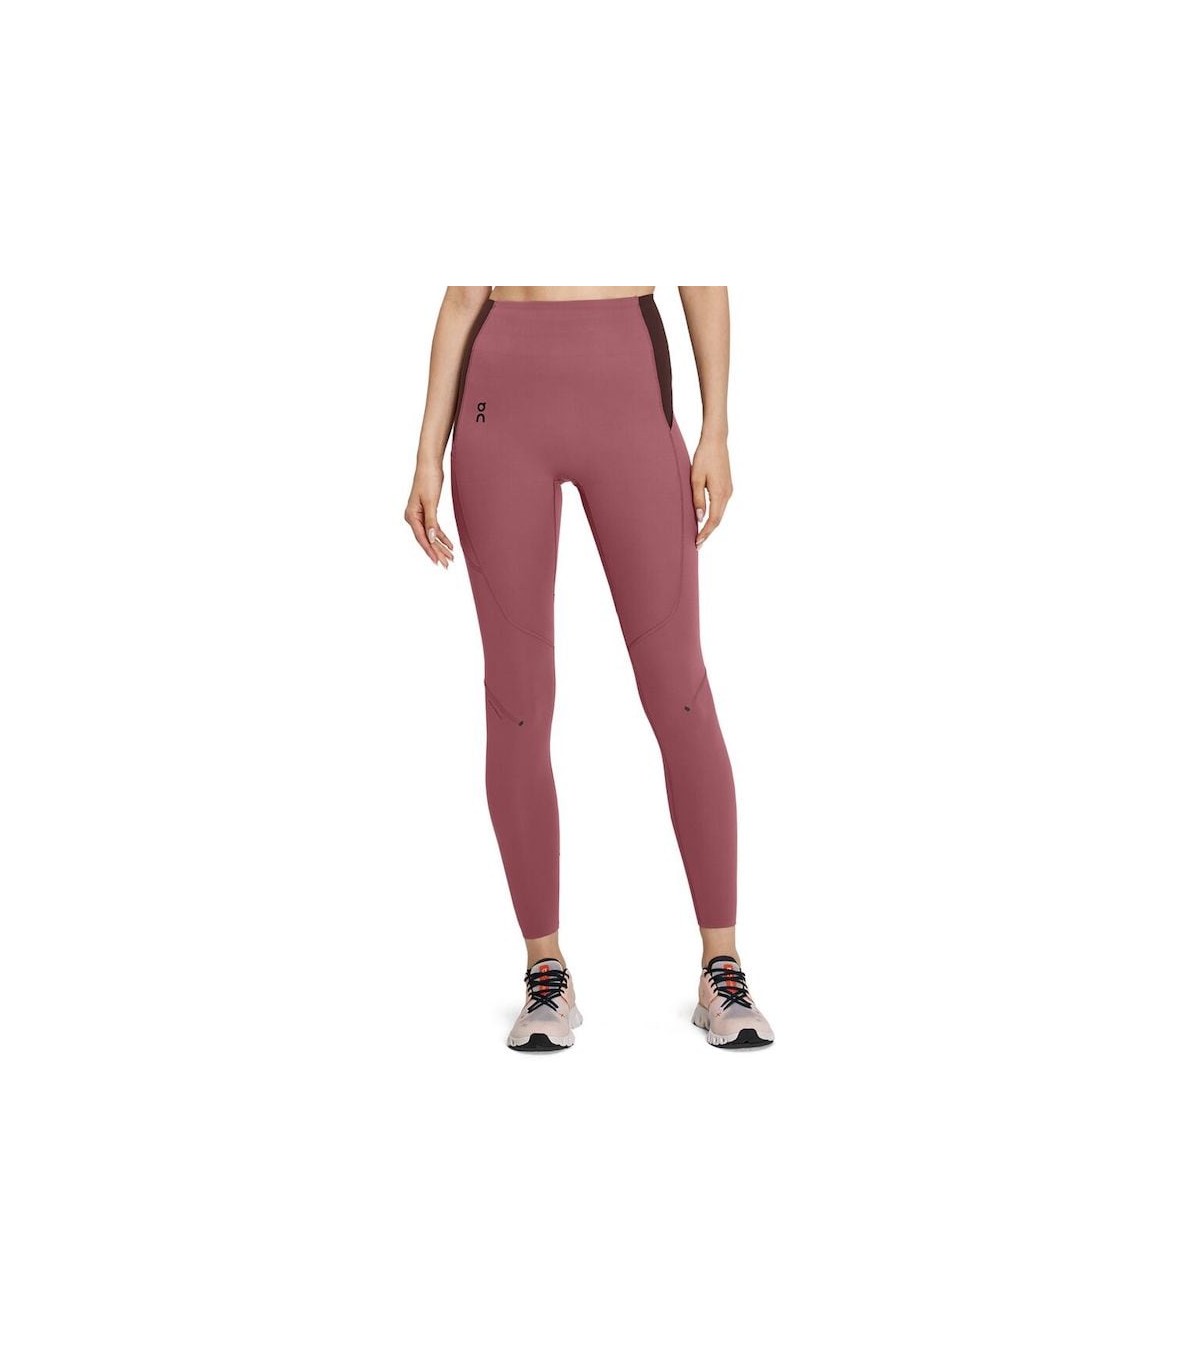 Movement Tights Long 1WD10220881 Swiss Engineering apparel/